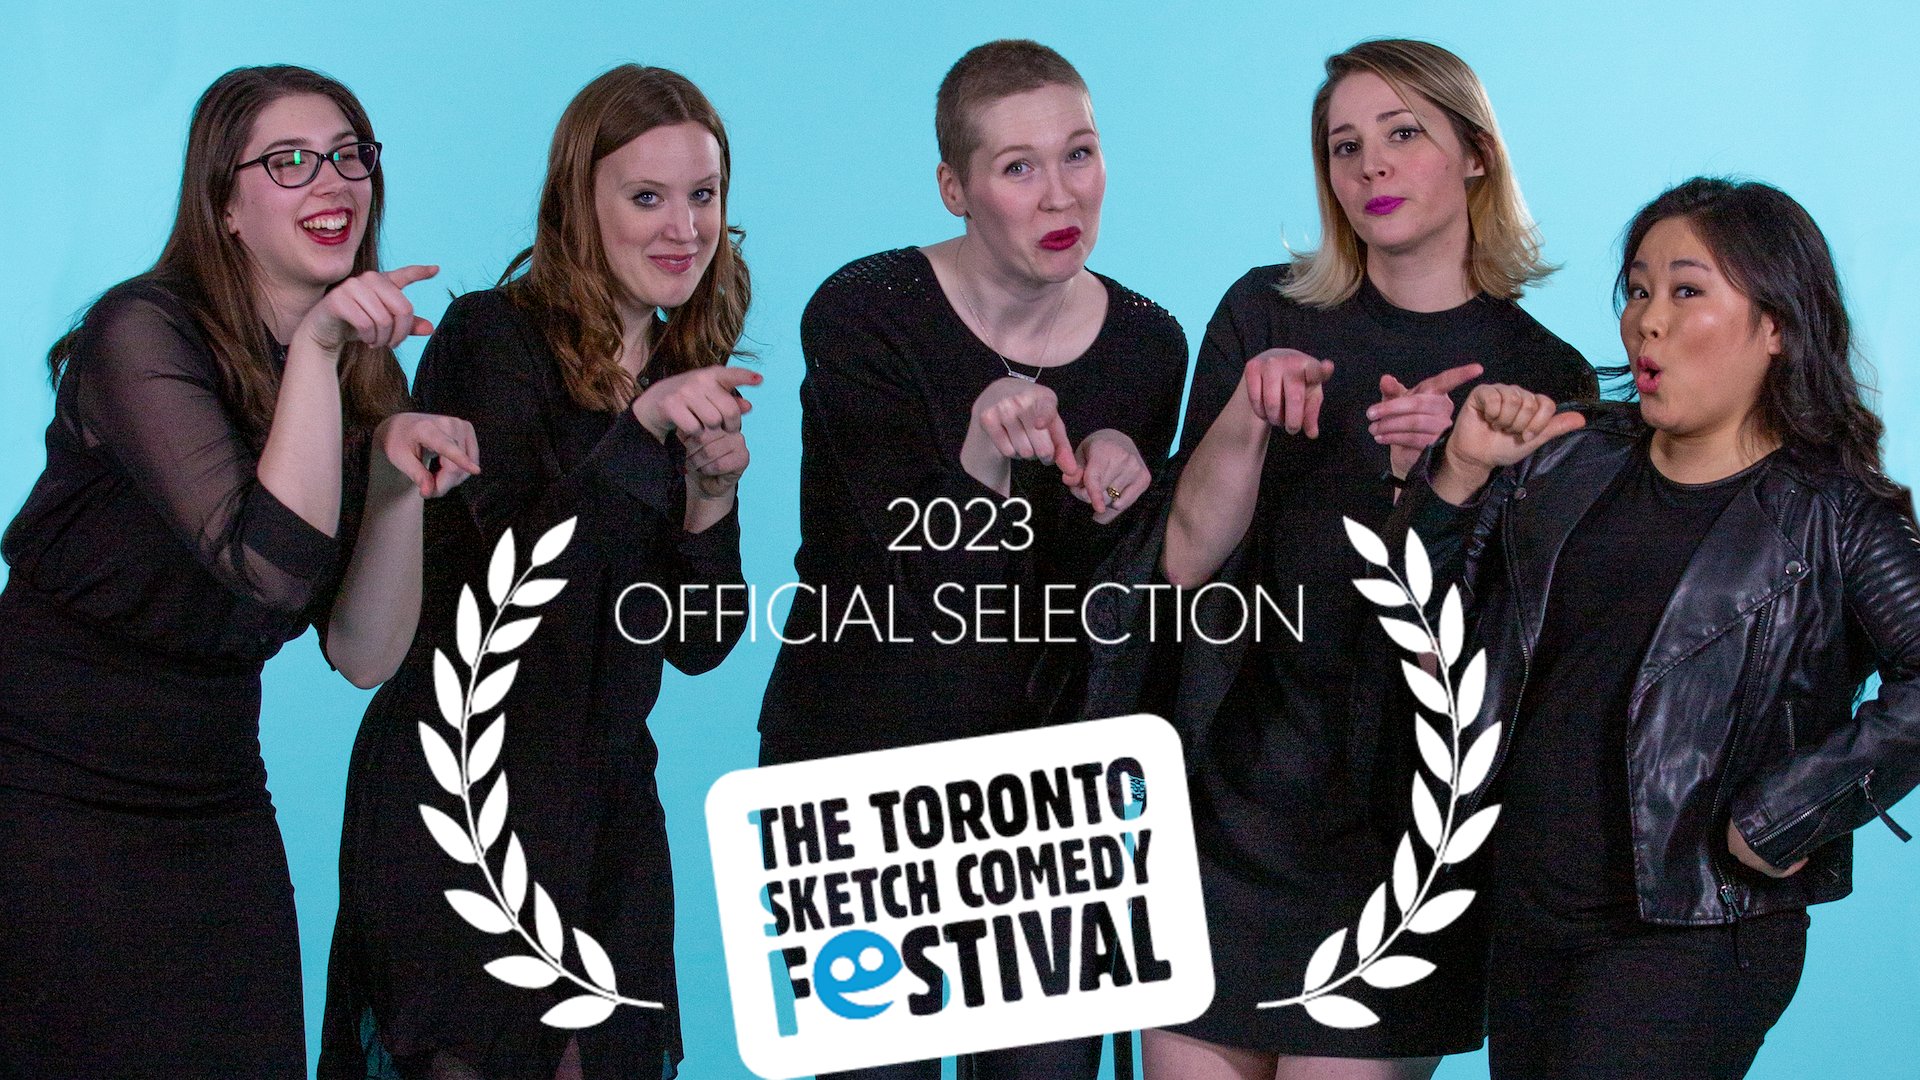 Big Chick Energy Sketch showcases the millennial woman experience in Toronto Sketch Comedy Festival debut